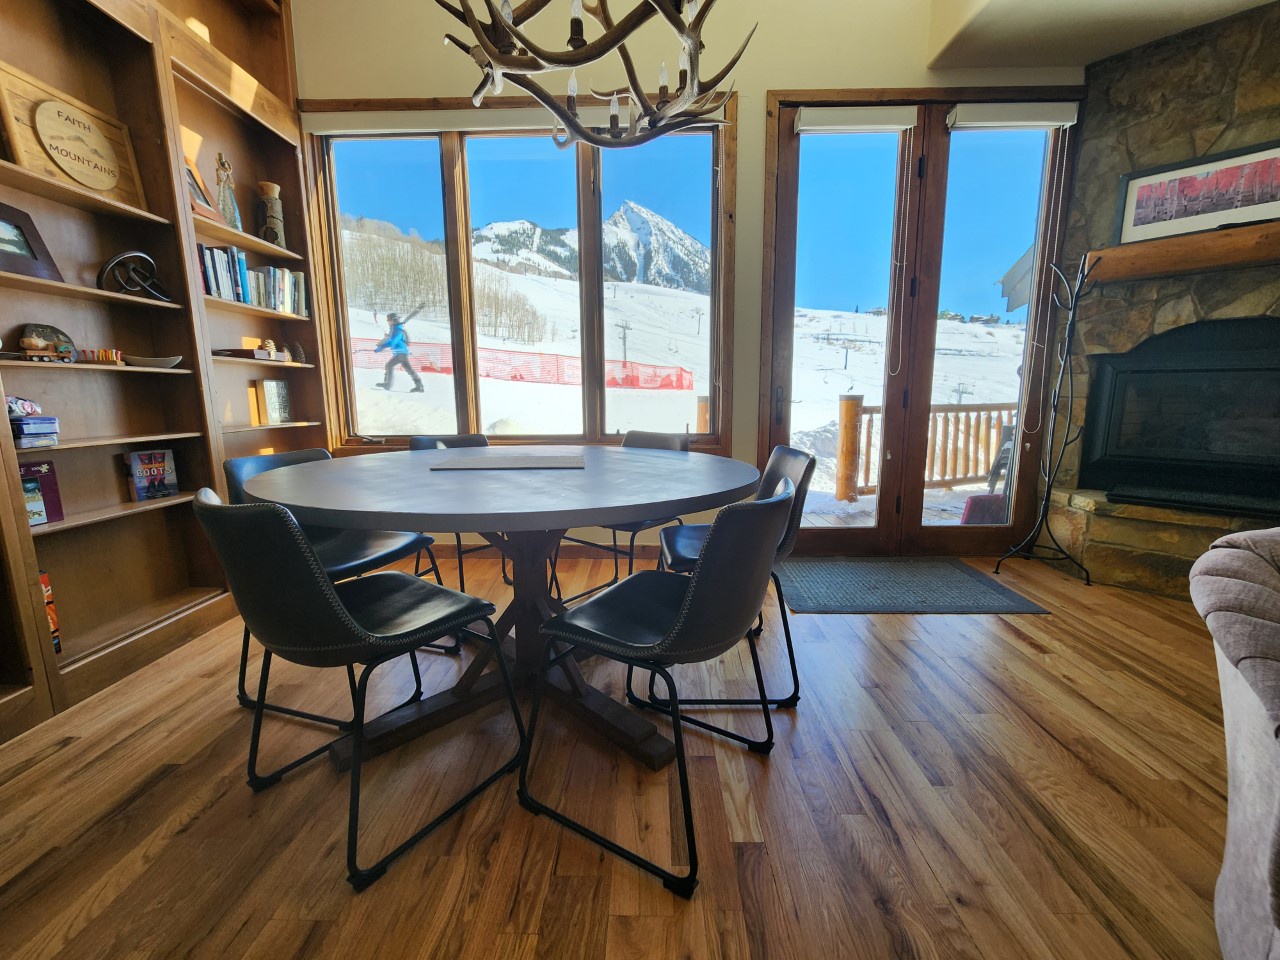 8 Silver Ridge Condominium - Luxury Rental, Pet-Friendly, Ski-in/Ski-out with Hot Tub on Mt. Crested Butte!